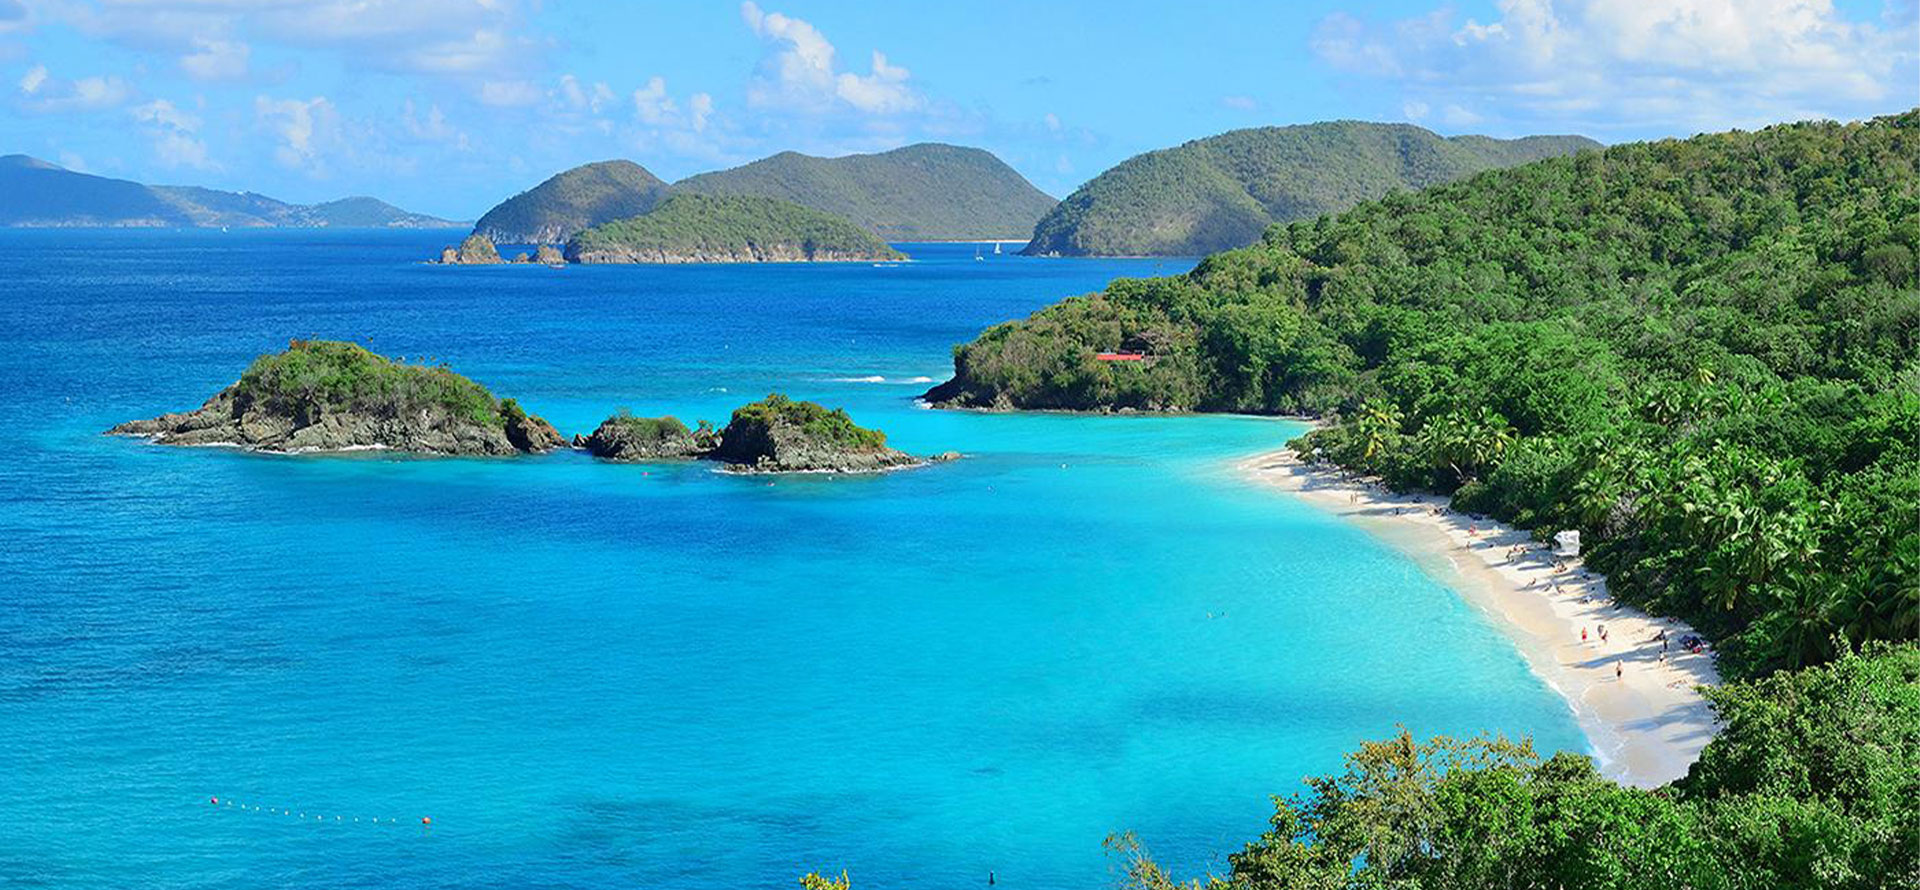 Us virgin islands all-iclusive resorts adults only and landscape.